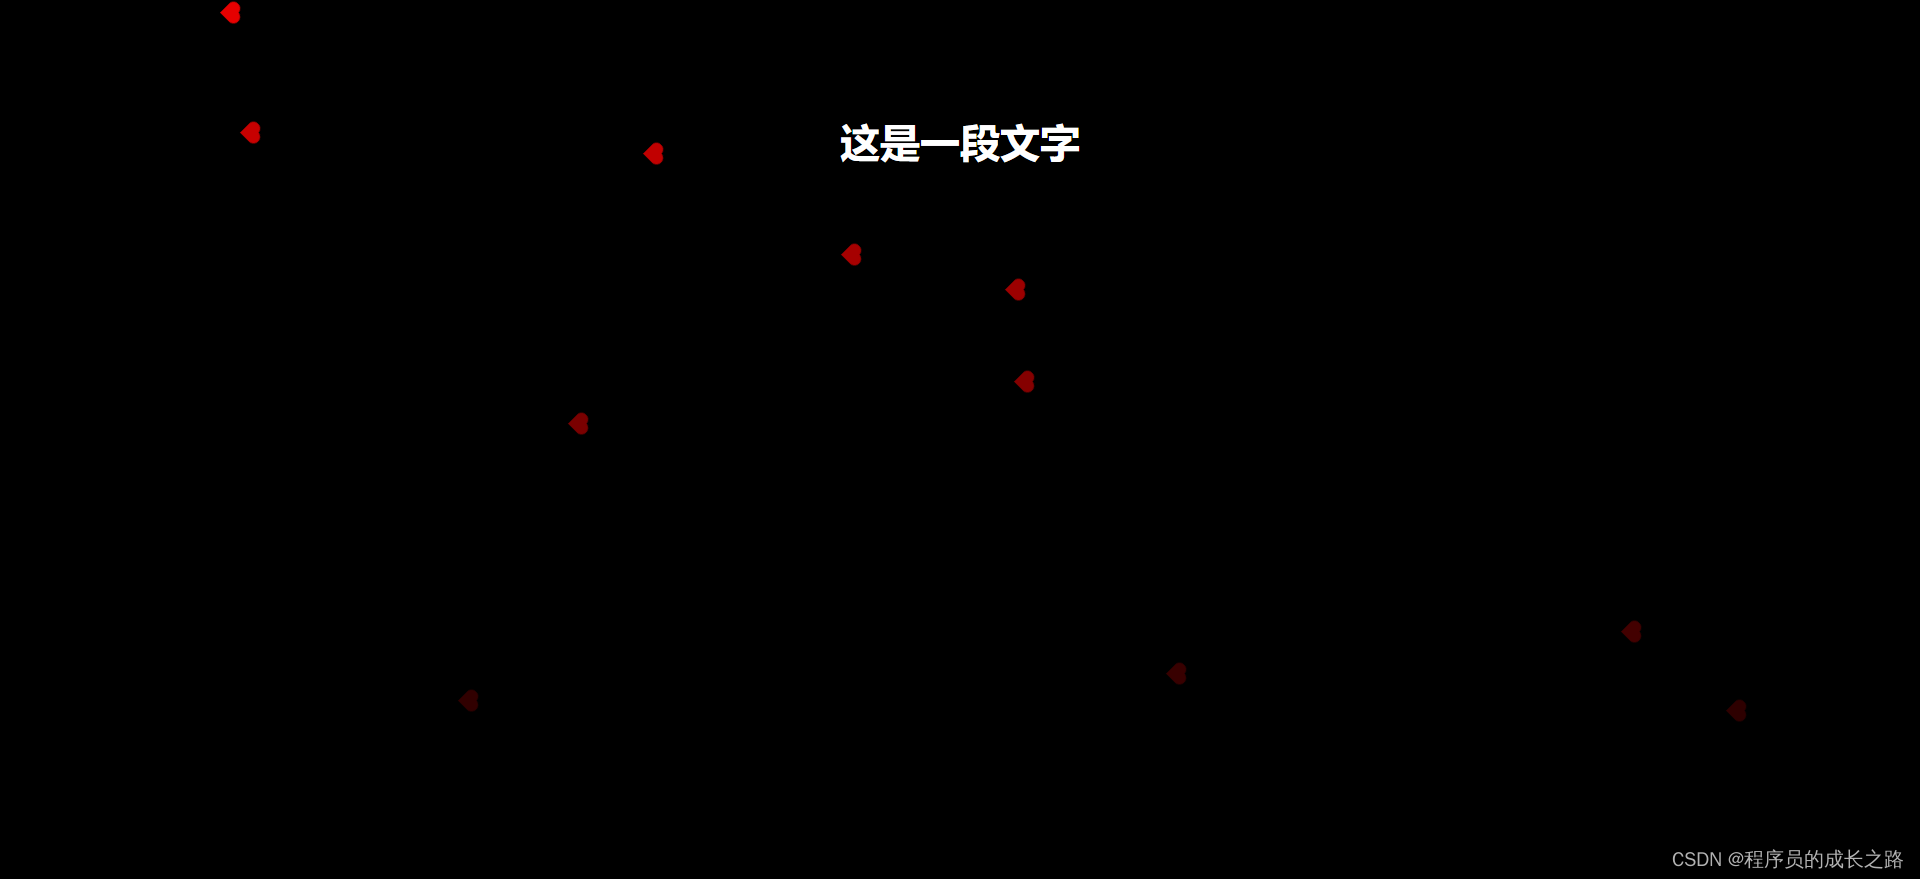 <span style='color:red;'>用</span> <span style='color:red;'>HTML</span>＋CSS <span style='color:red;'>实现</span>全屏爱心滴落<span style='color:red;'>的</span>动画<span style='color:red;'>效果</span>，中间可显示名字